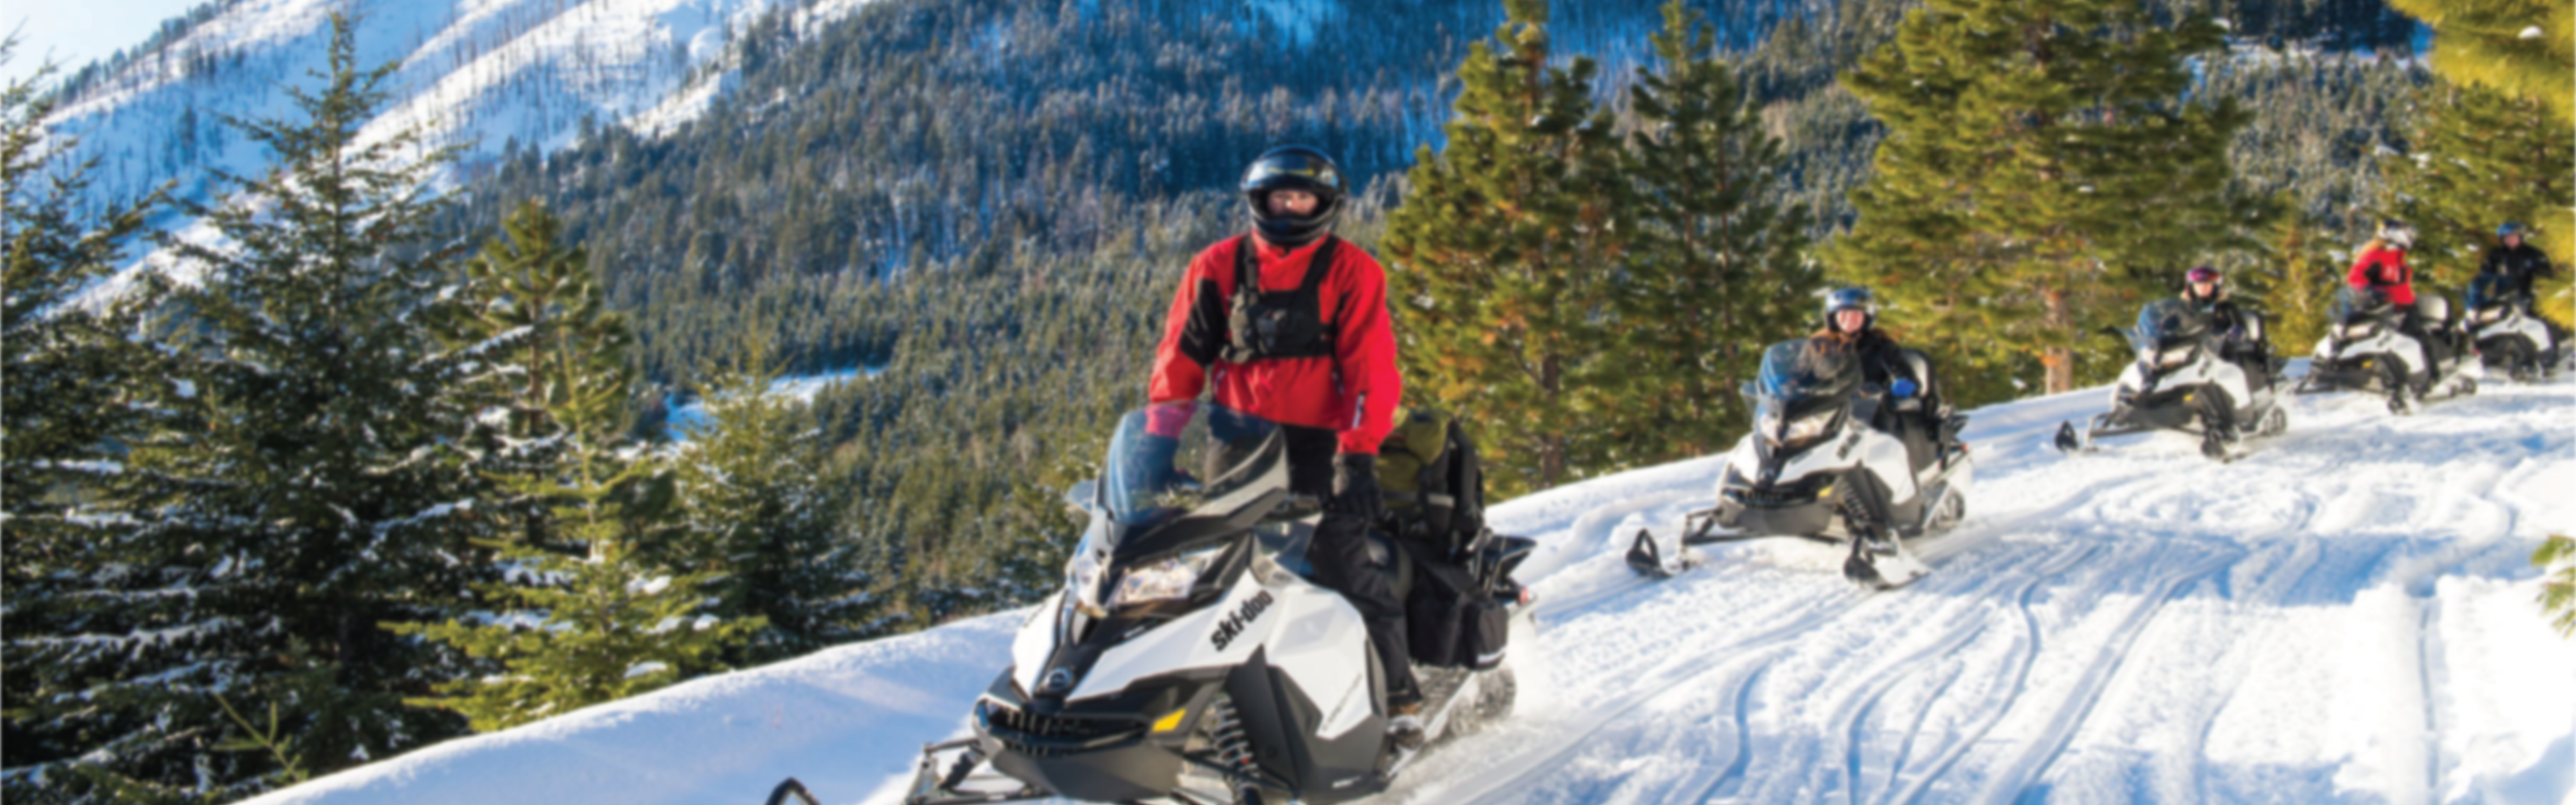 Snow mobiles traveling on mountain side